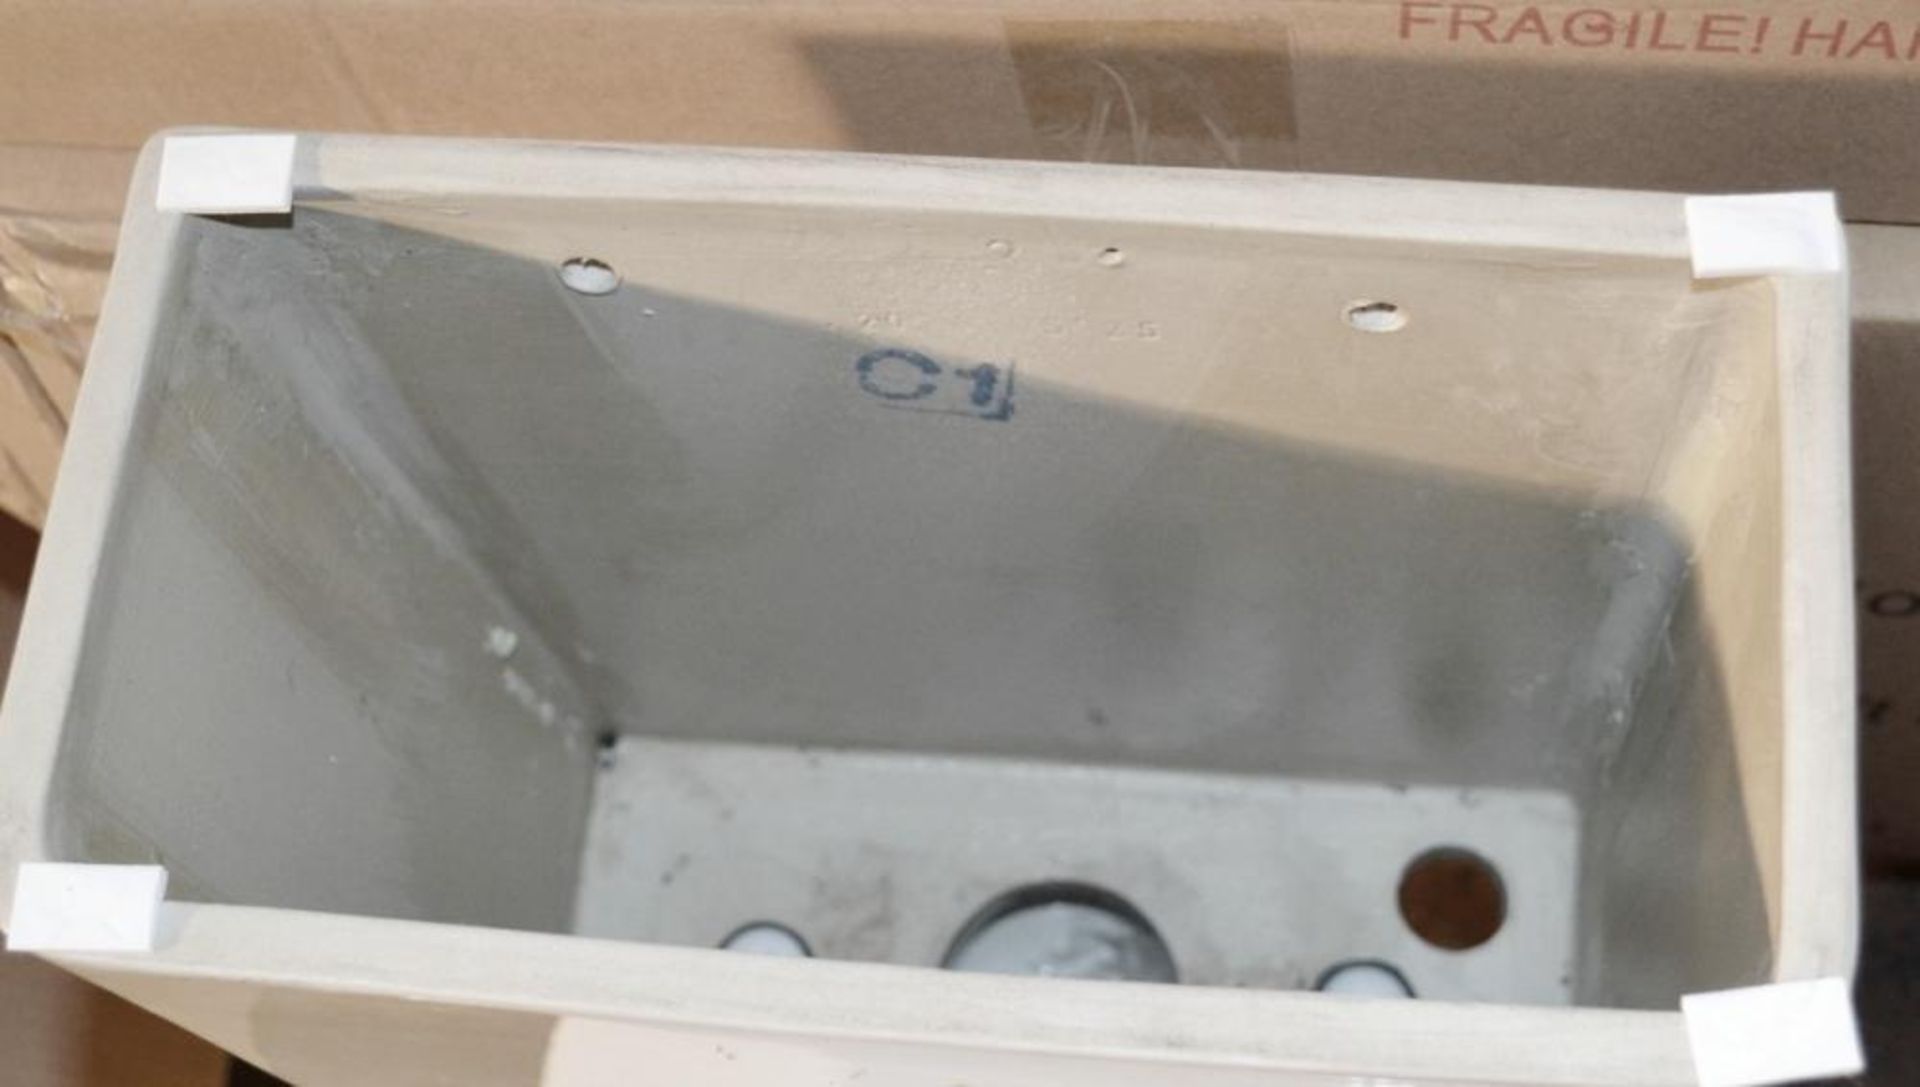 1 x Close Coupled Toilet Pan With Soft Close Toilet Seat And Cistern (Inc. Fittings) - Brand New Box - Image 5 of 9